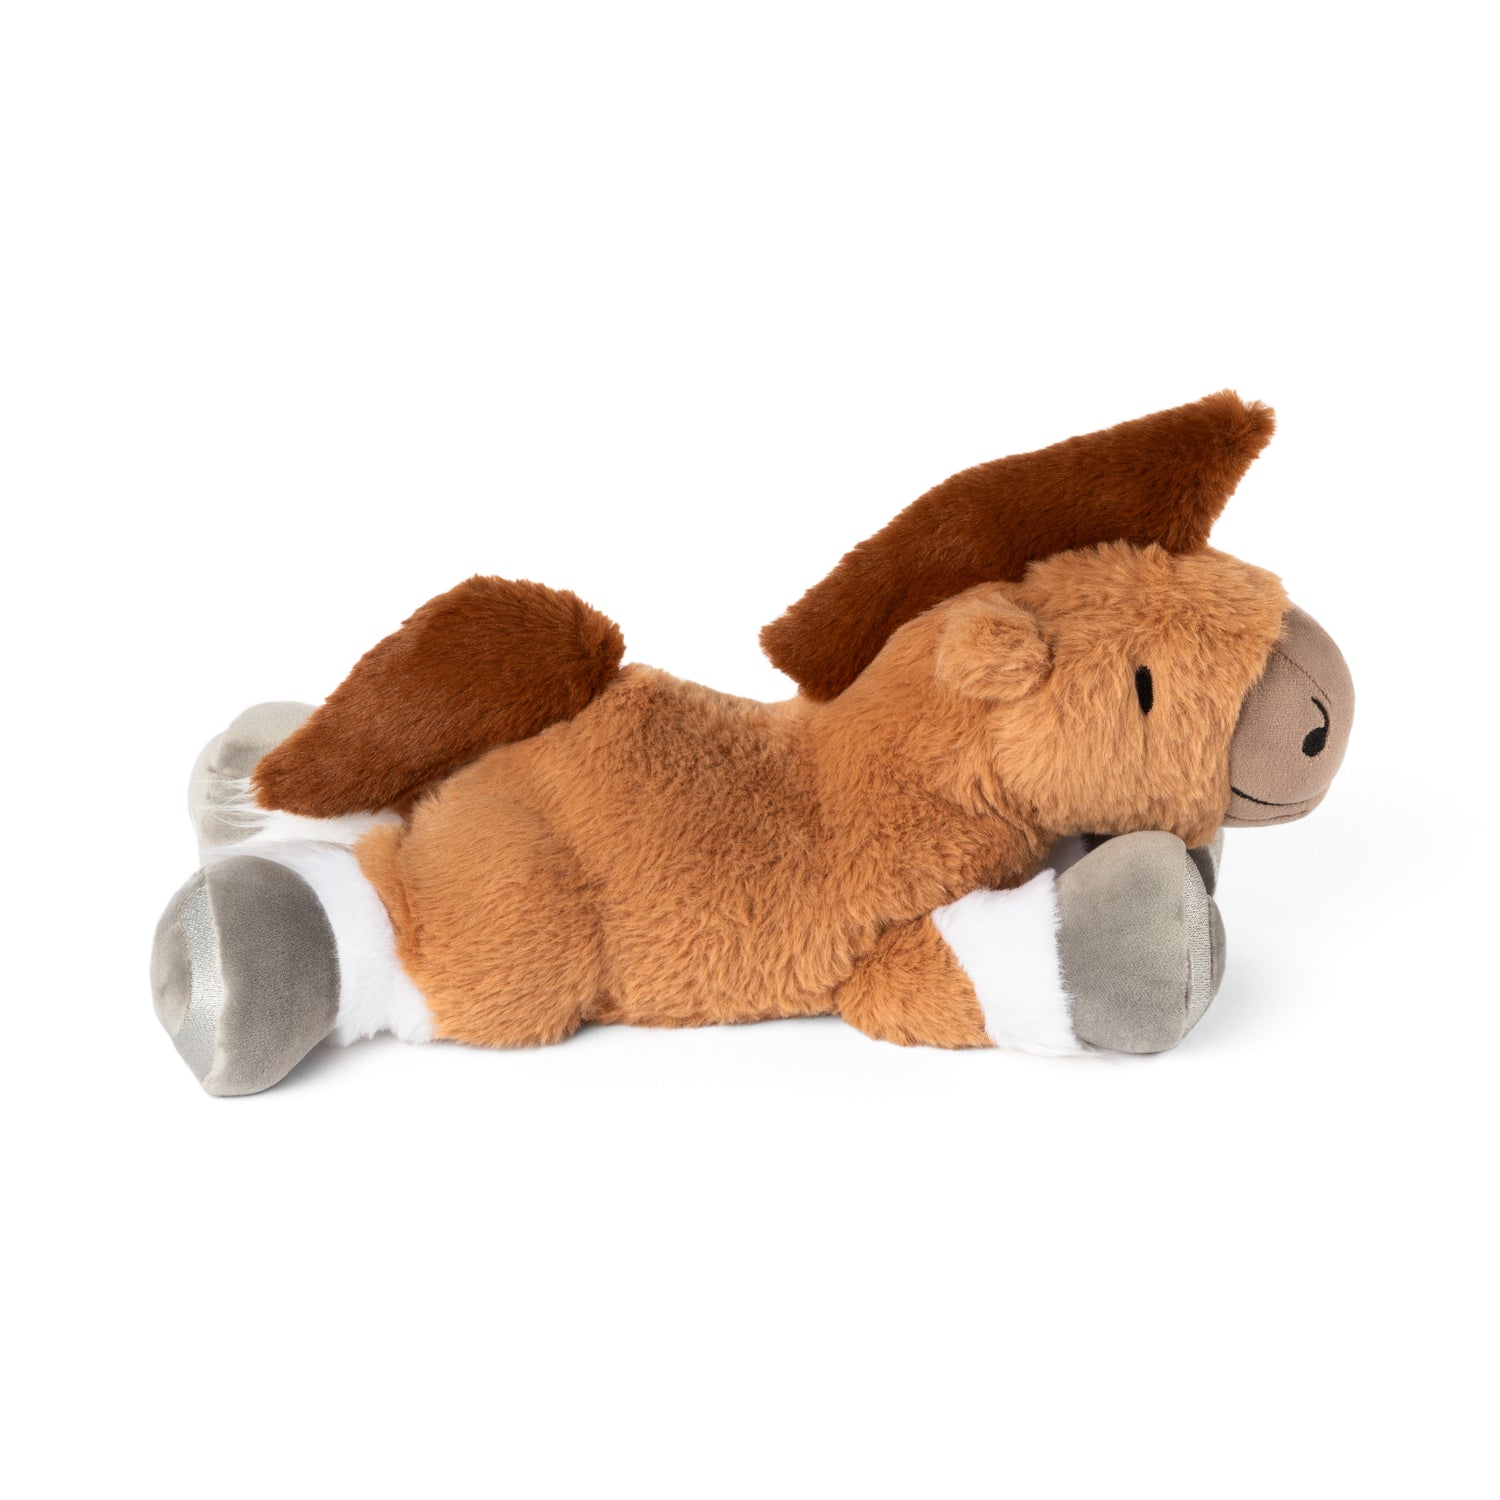 Plush toy of a horse lying down